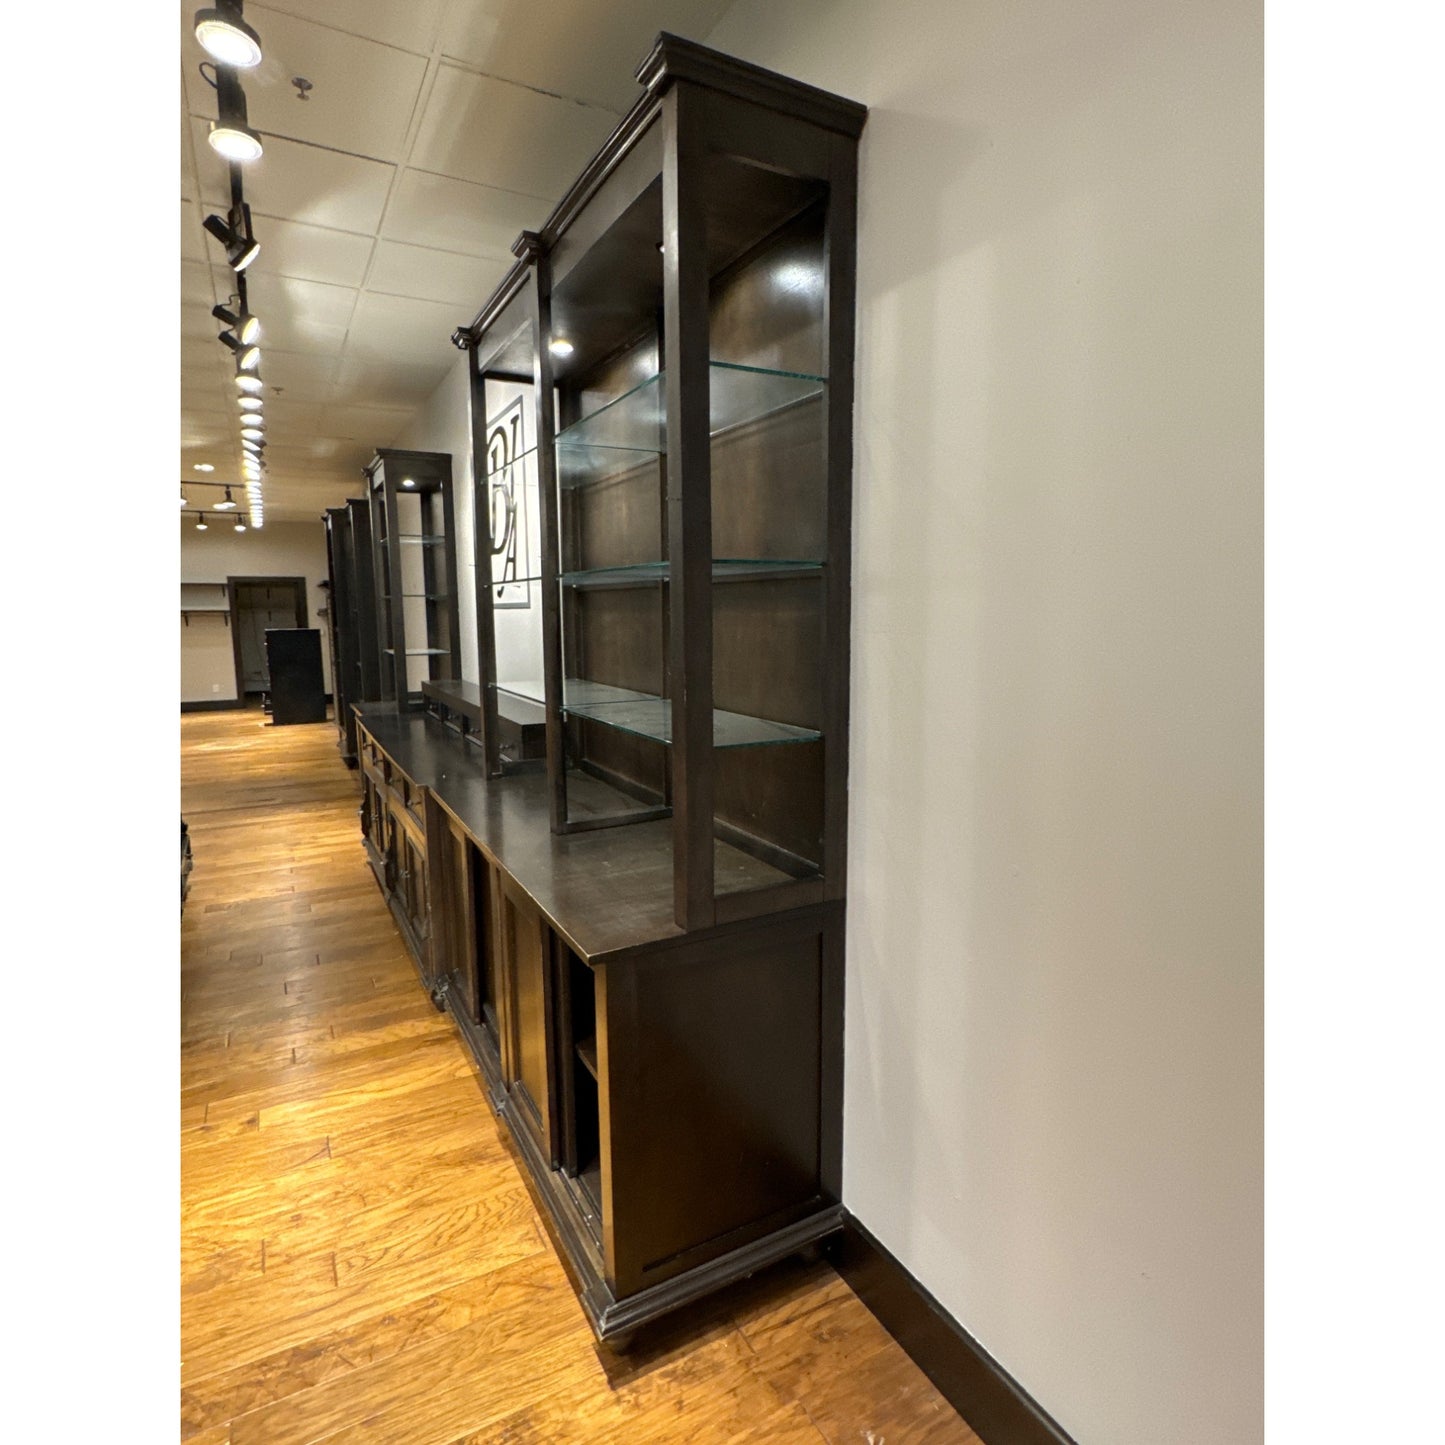 Shelving Unit with Lower Cabinets